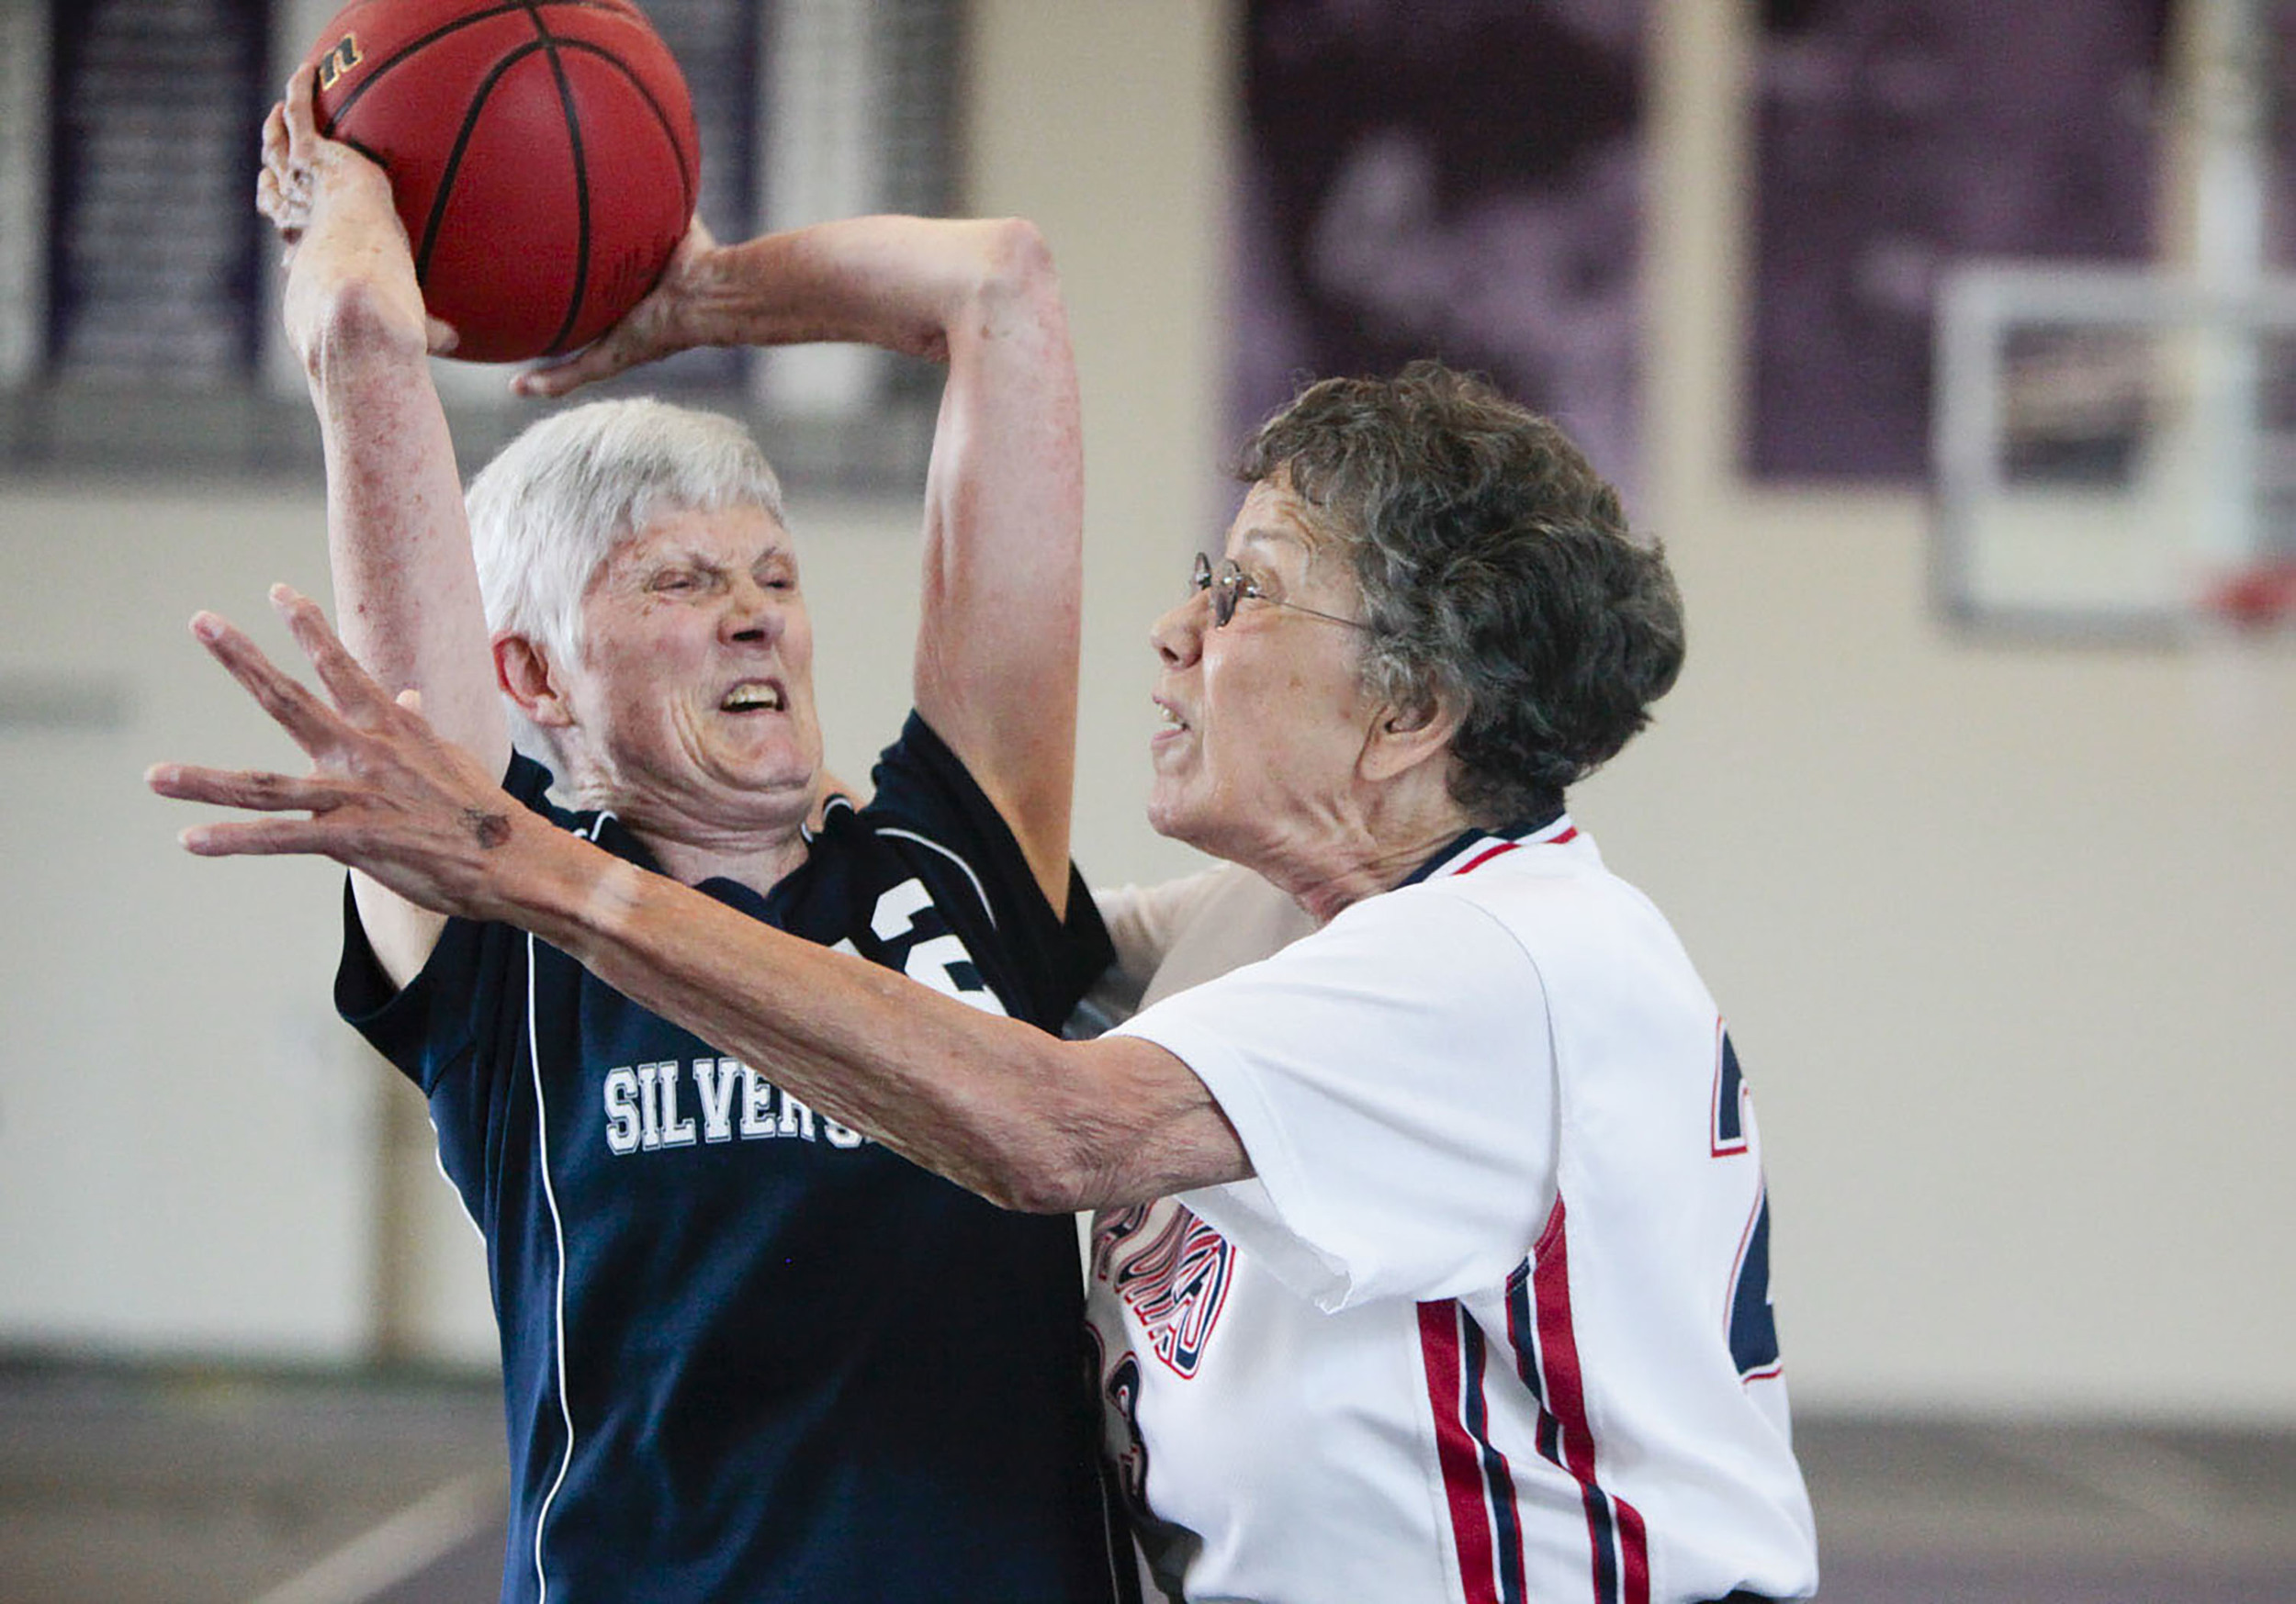  Kay Poole (left) of the Silver Spirits attempts to pass the ball as Jacqueline Stephens (right) of NOVA United Classics blocks her during the National Senior Games basketball competition. This competition took place at the St. Thomas University Bask